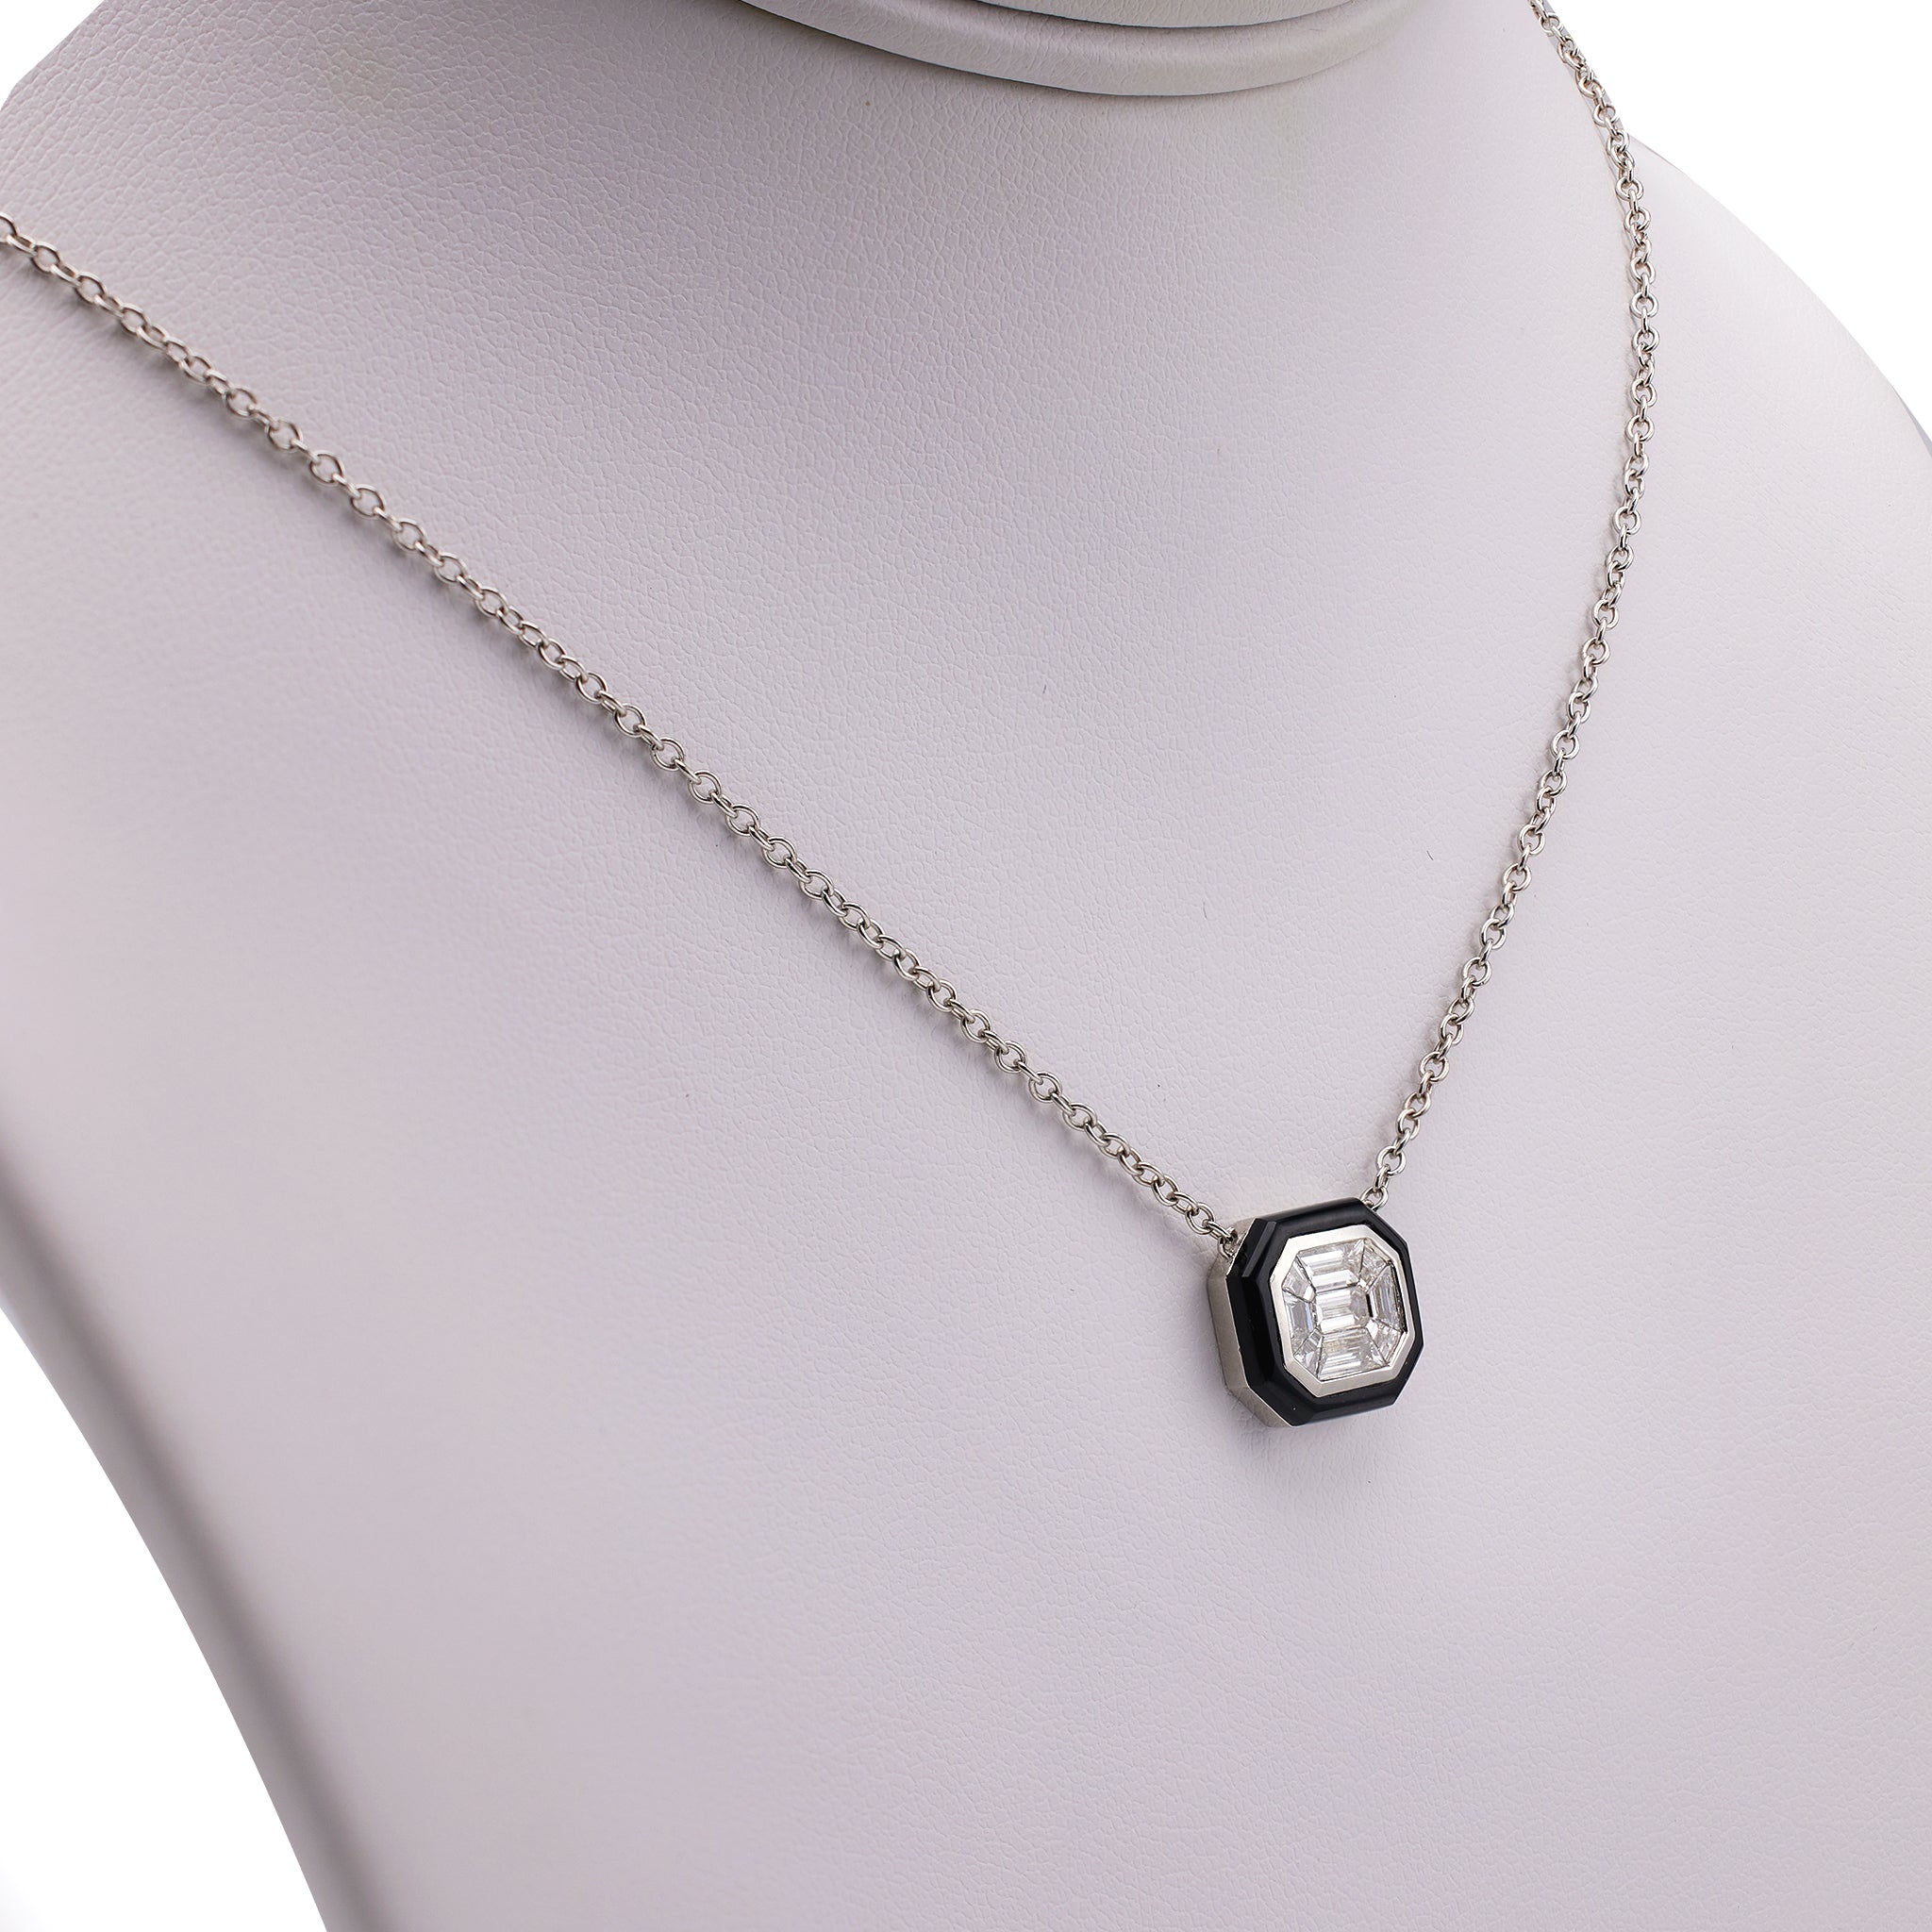 0.63 Carat Total Weight Diamond Onyx 18k White Gold Pendant Necklace Pendants Jack Weir & Sons   